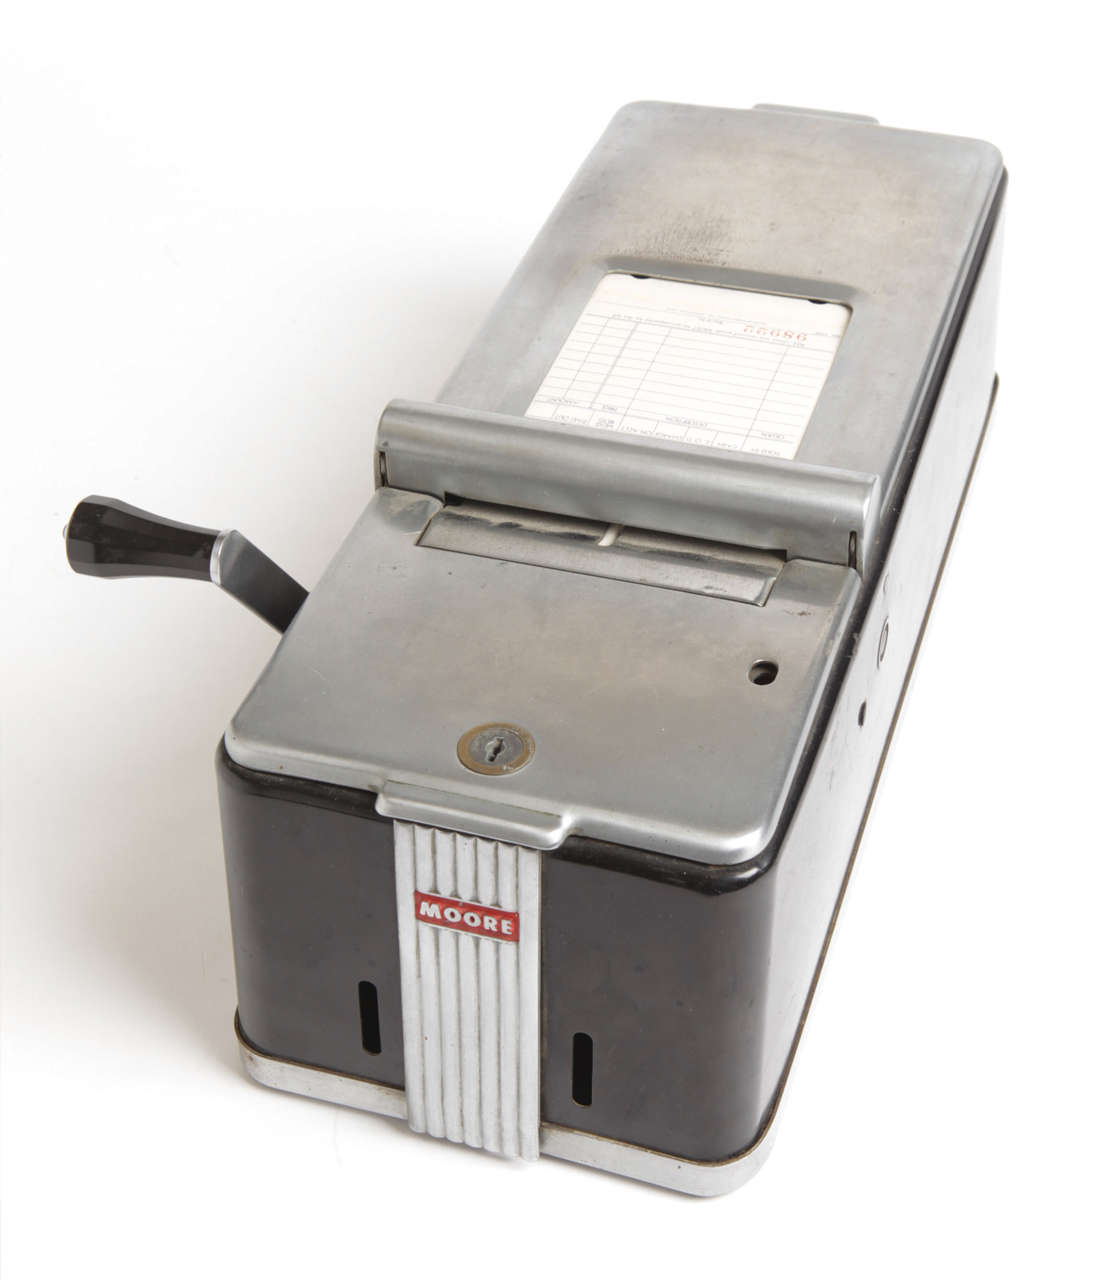 Fine example of iconic American Industrial design, mid-1940s.<br />
<br />
Essentially complete with a roll of forms inside. <br />
Front lid opens, providing access to roll.<br />
Missing original key to rear receipt receptacle.<br />
<br />
!8